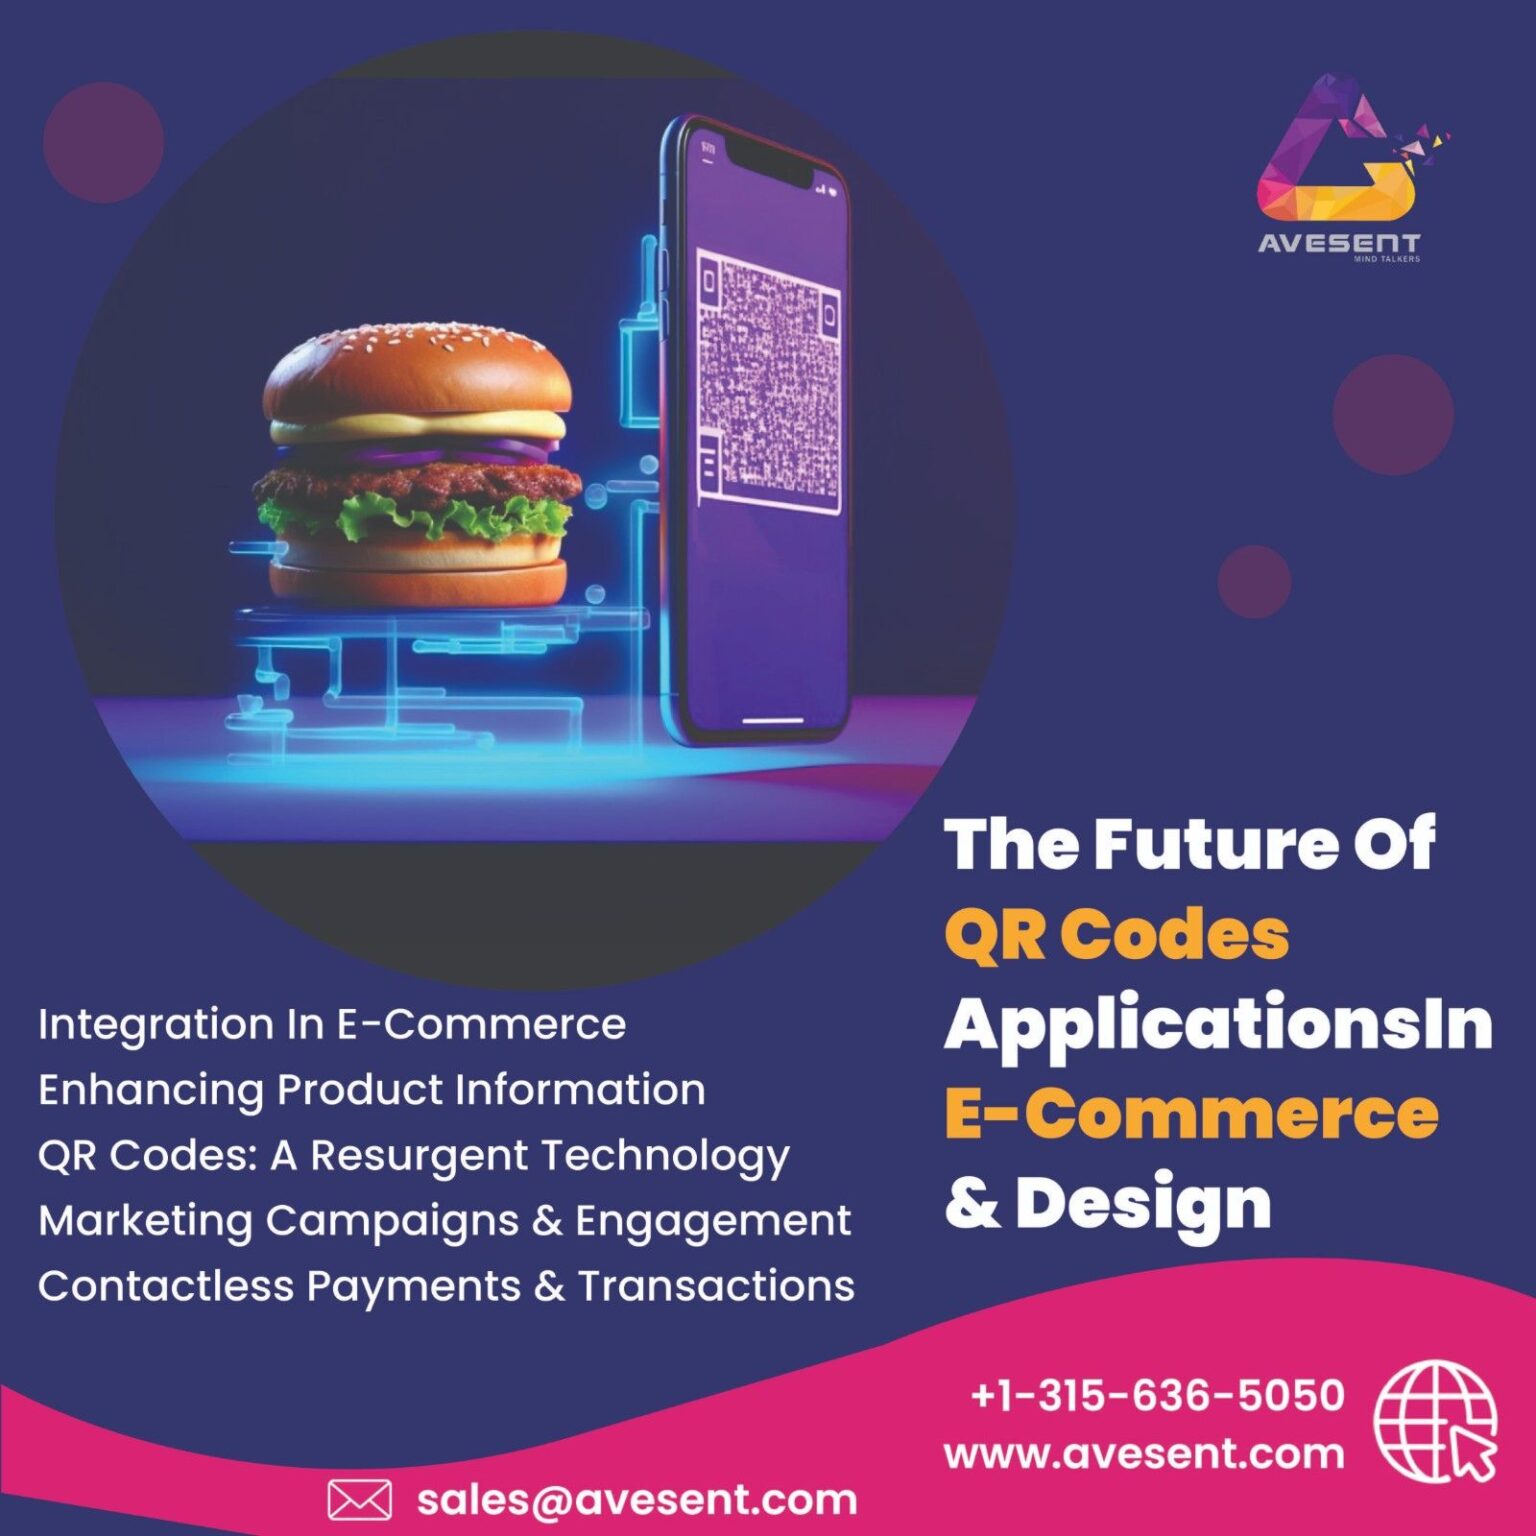 You are currently viewing The Future of QR Codes Applications in E-commerce and Design